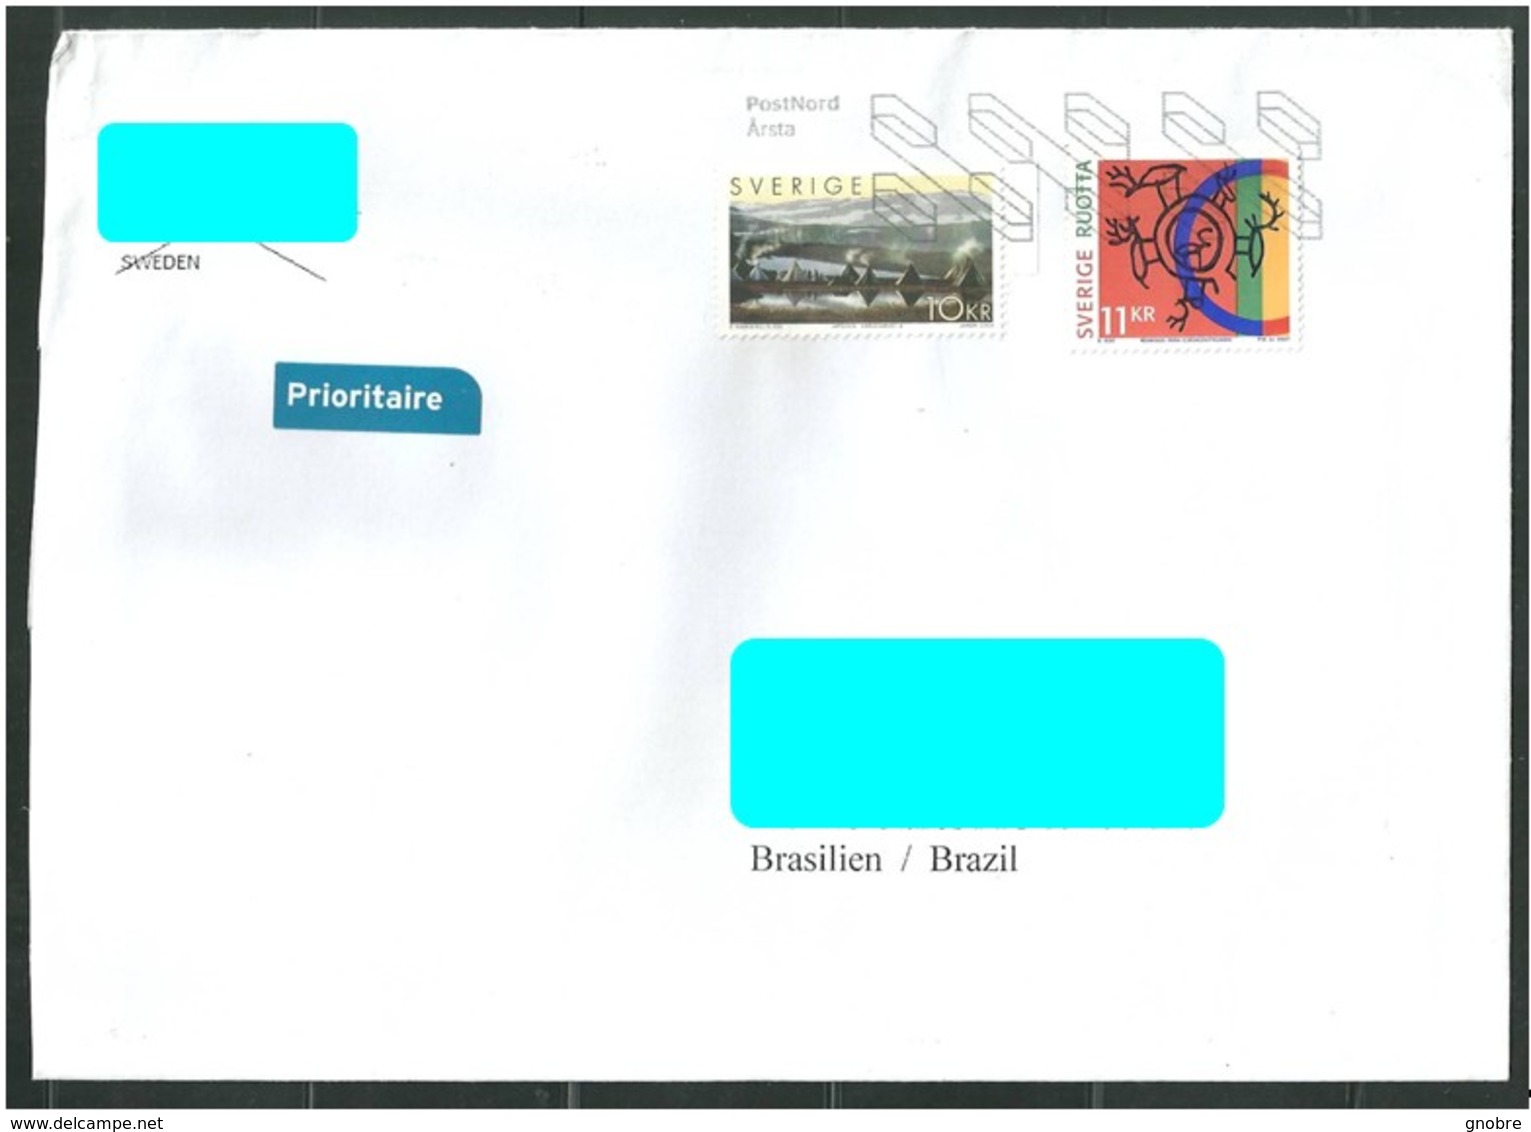 SWEDEN To Brazil Cover Sent In 2018? With 2 Topical Stamps And Beautiful Cancel Mark (GN 0117). - Brieven En Documenten